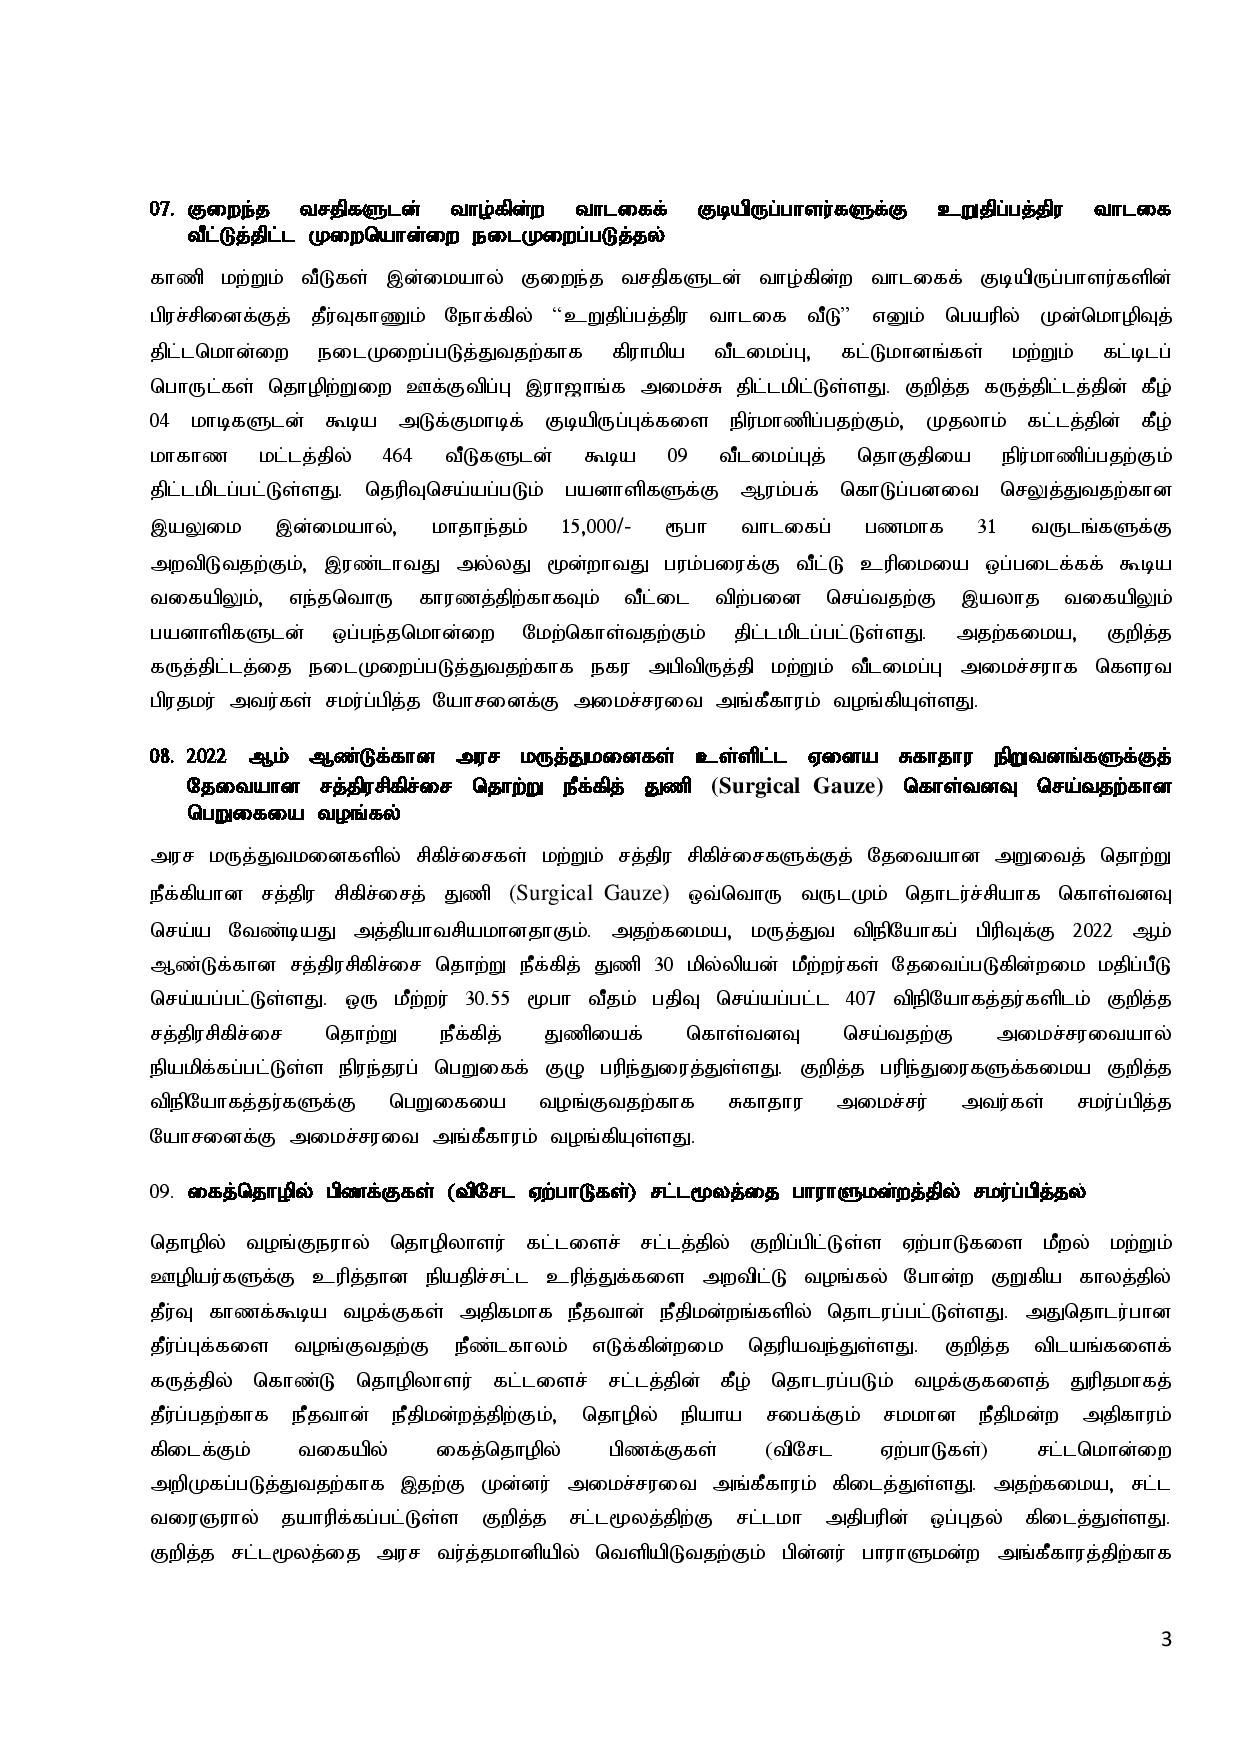 Cabinet Decisions on 21.03.2022 T page 003